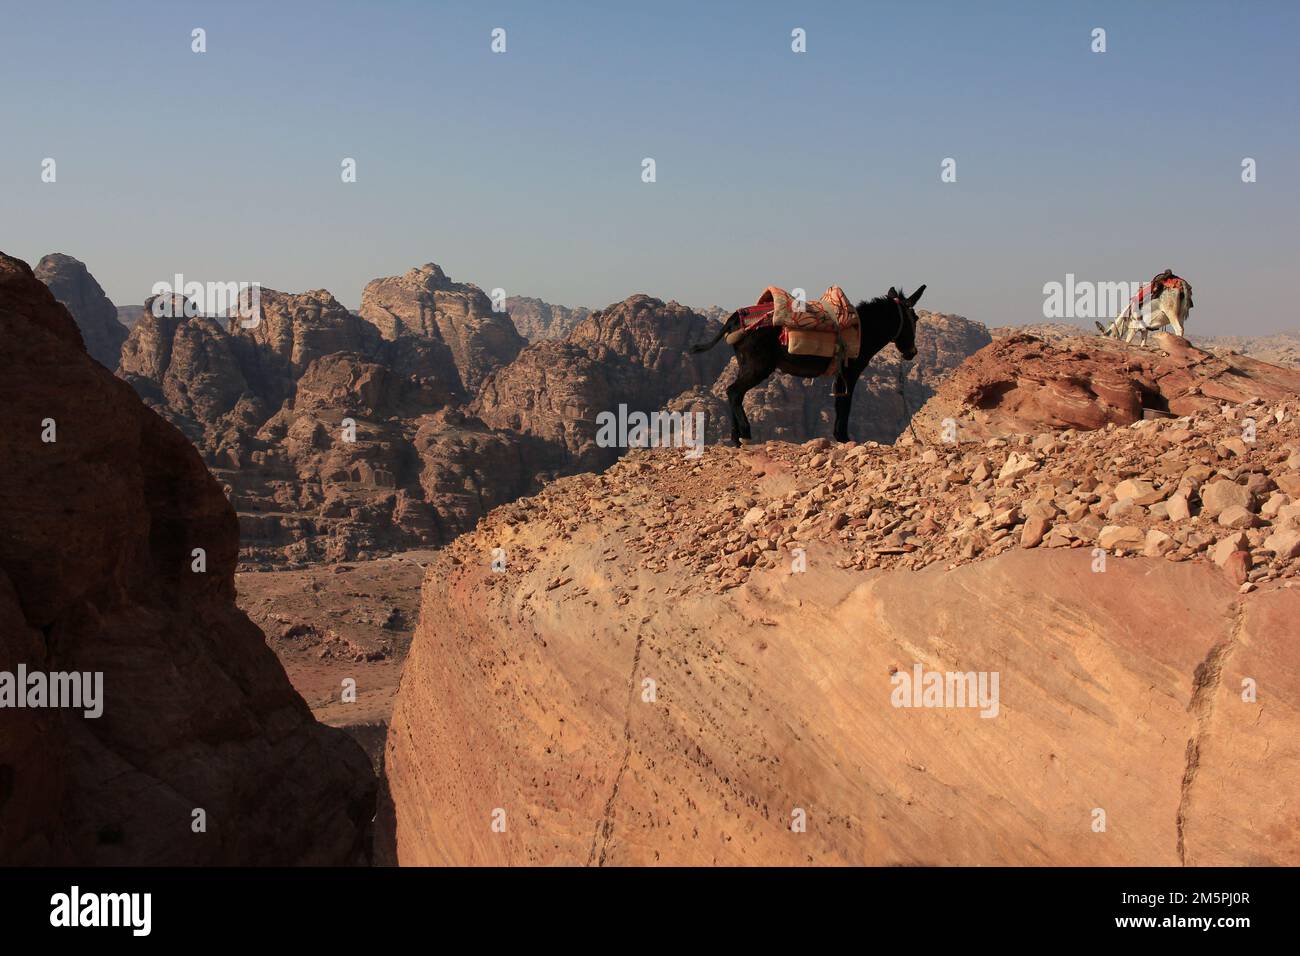 Typical mountain view on the trail with two donkey in the sight, in Petra, Jordan Stock Photo